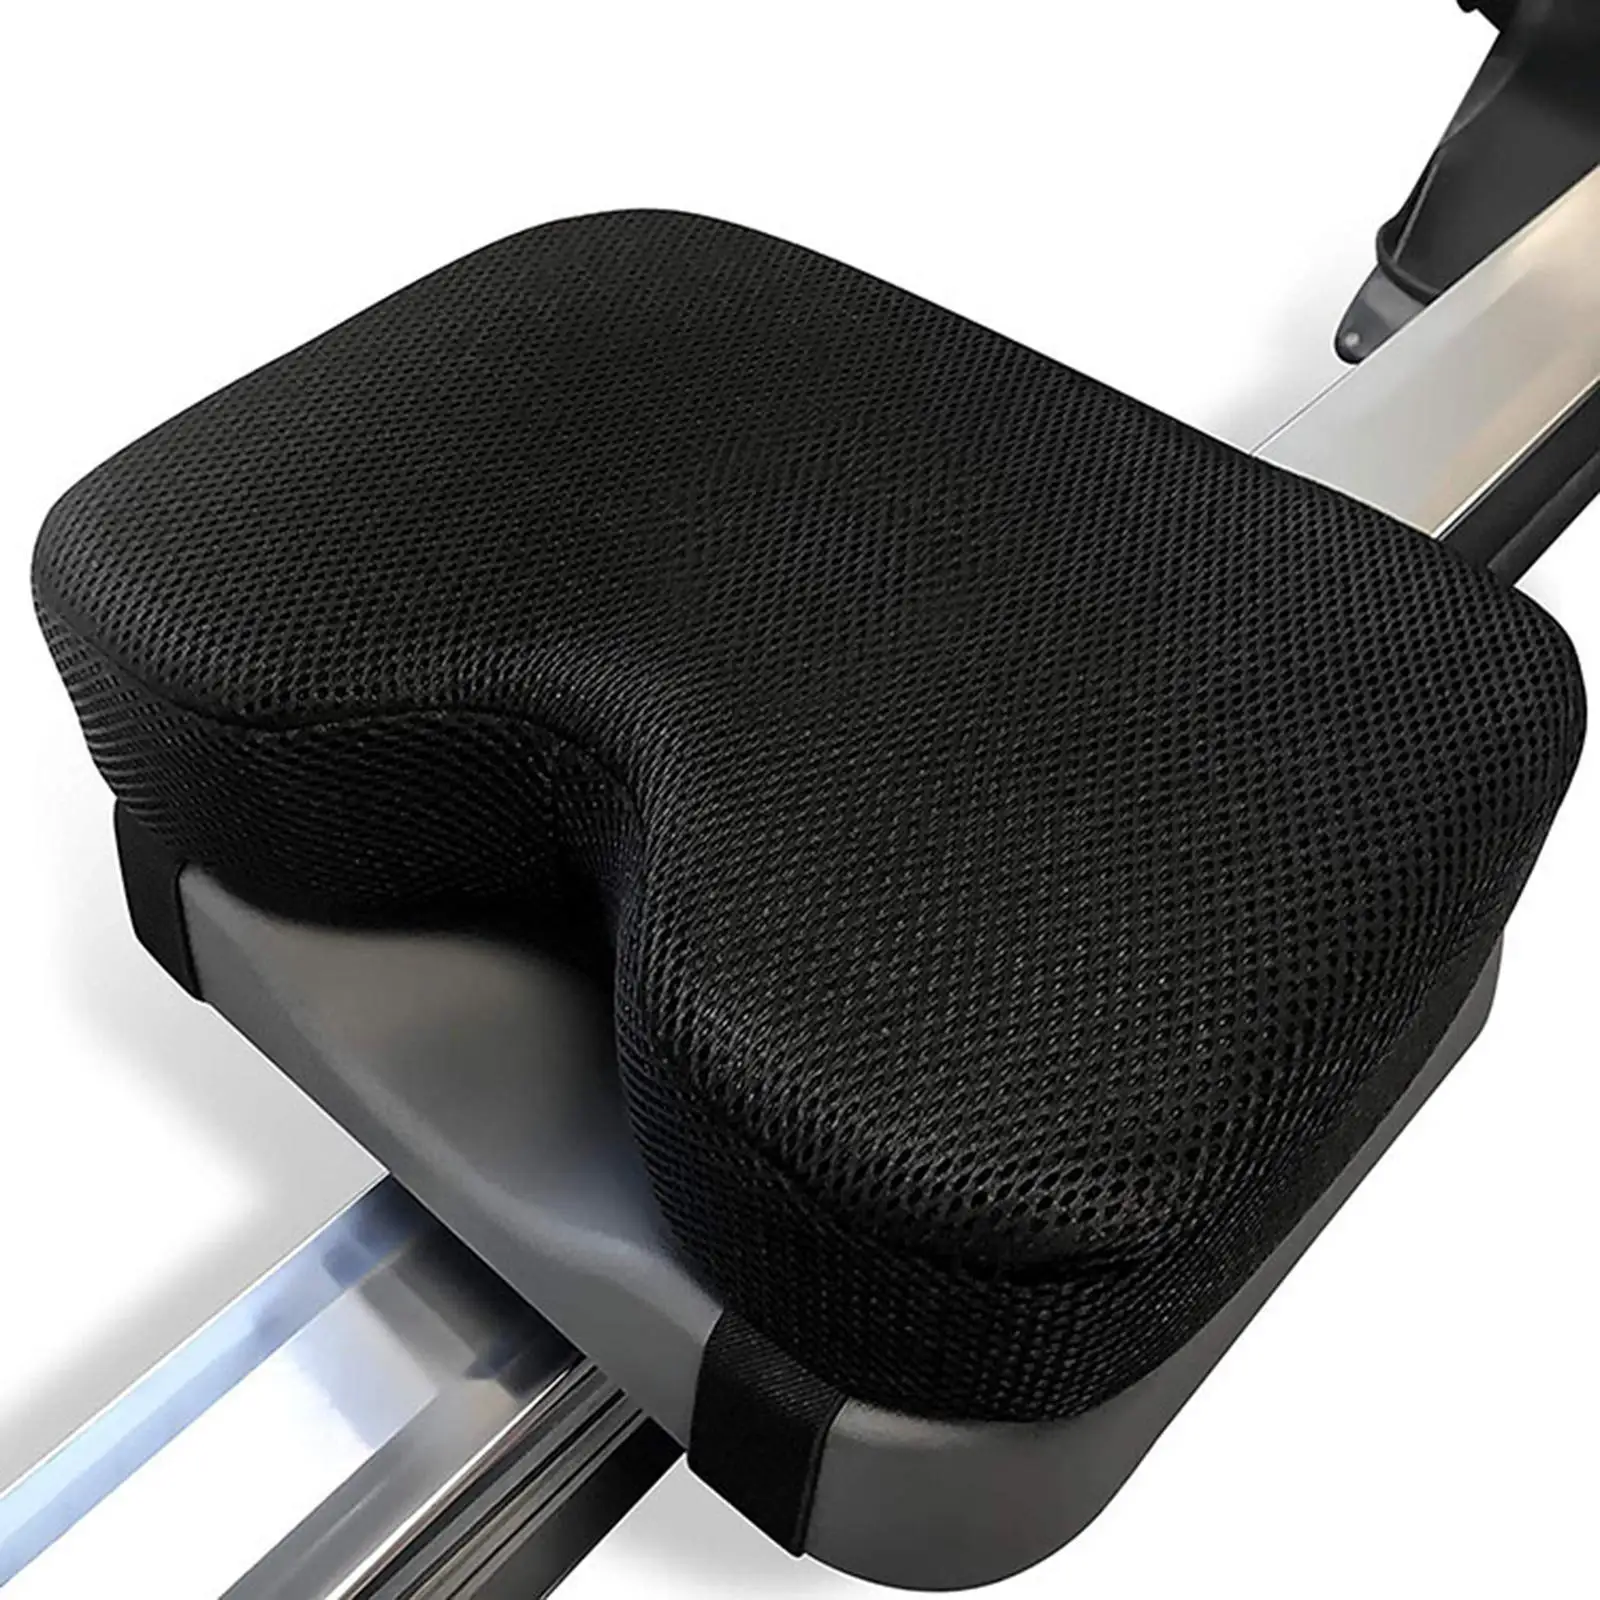 Portable Rowing Machine Seat Cushion Pad Comfortable for Indoor Athlete